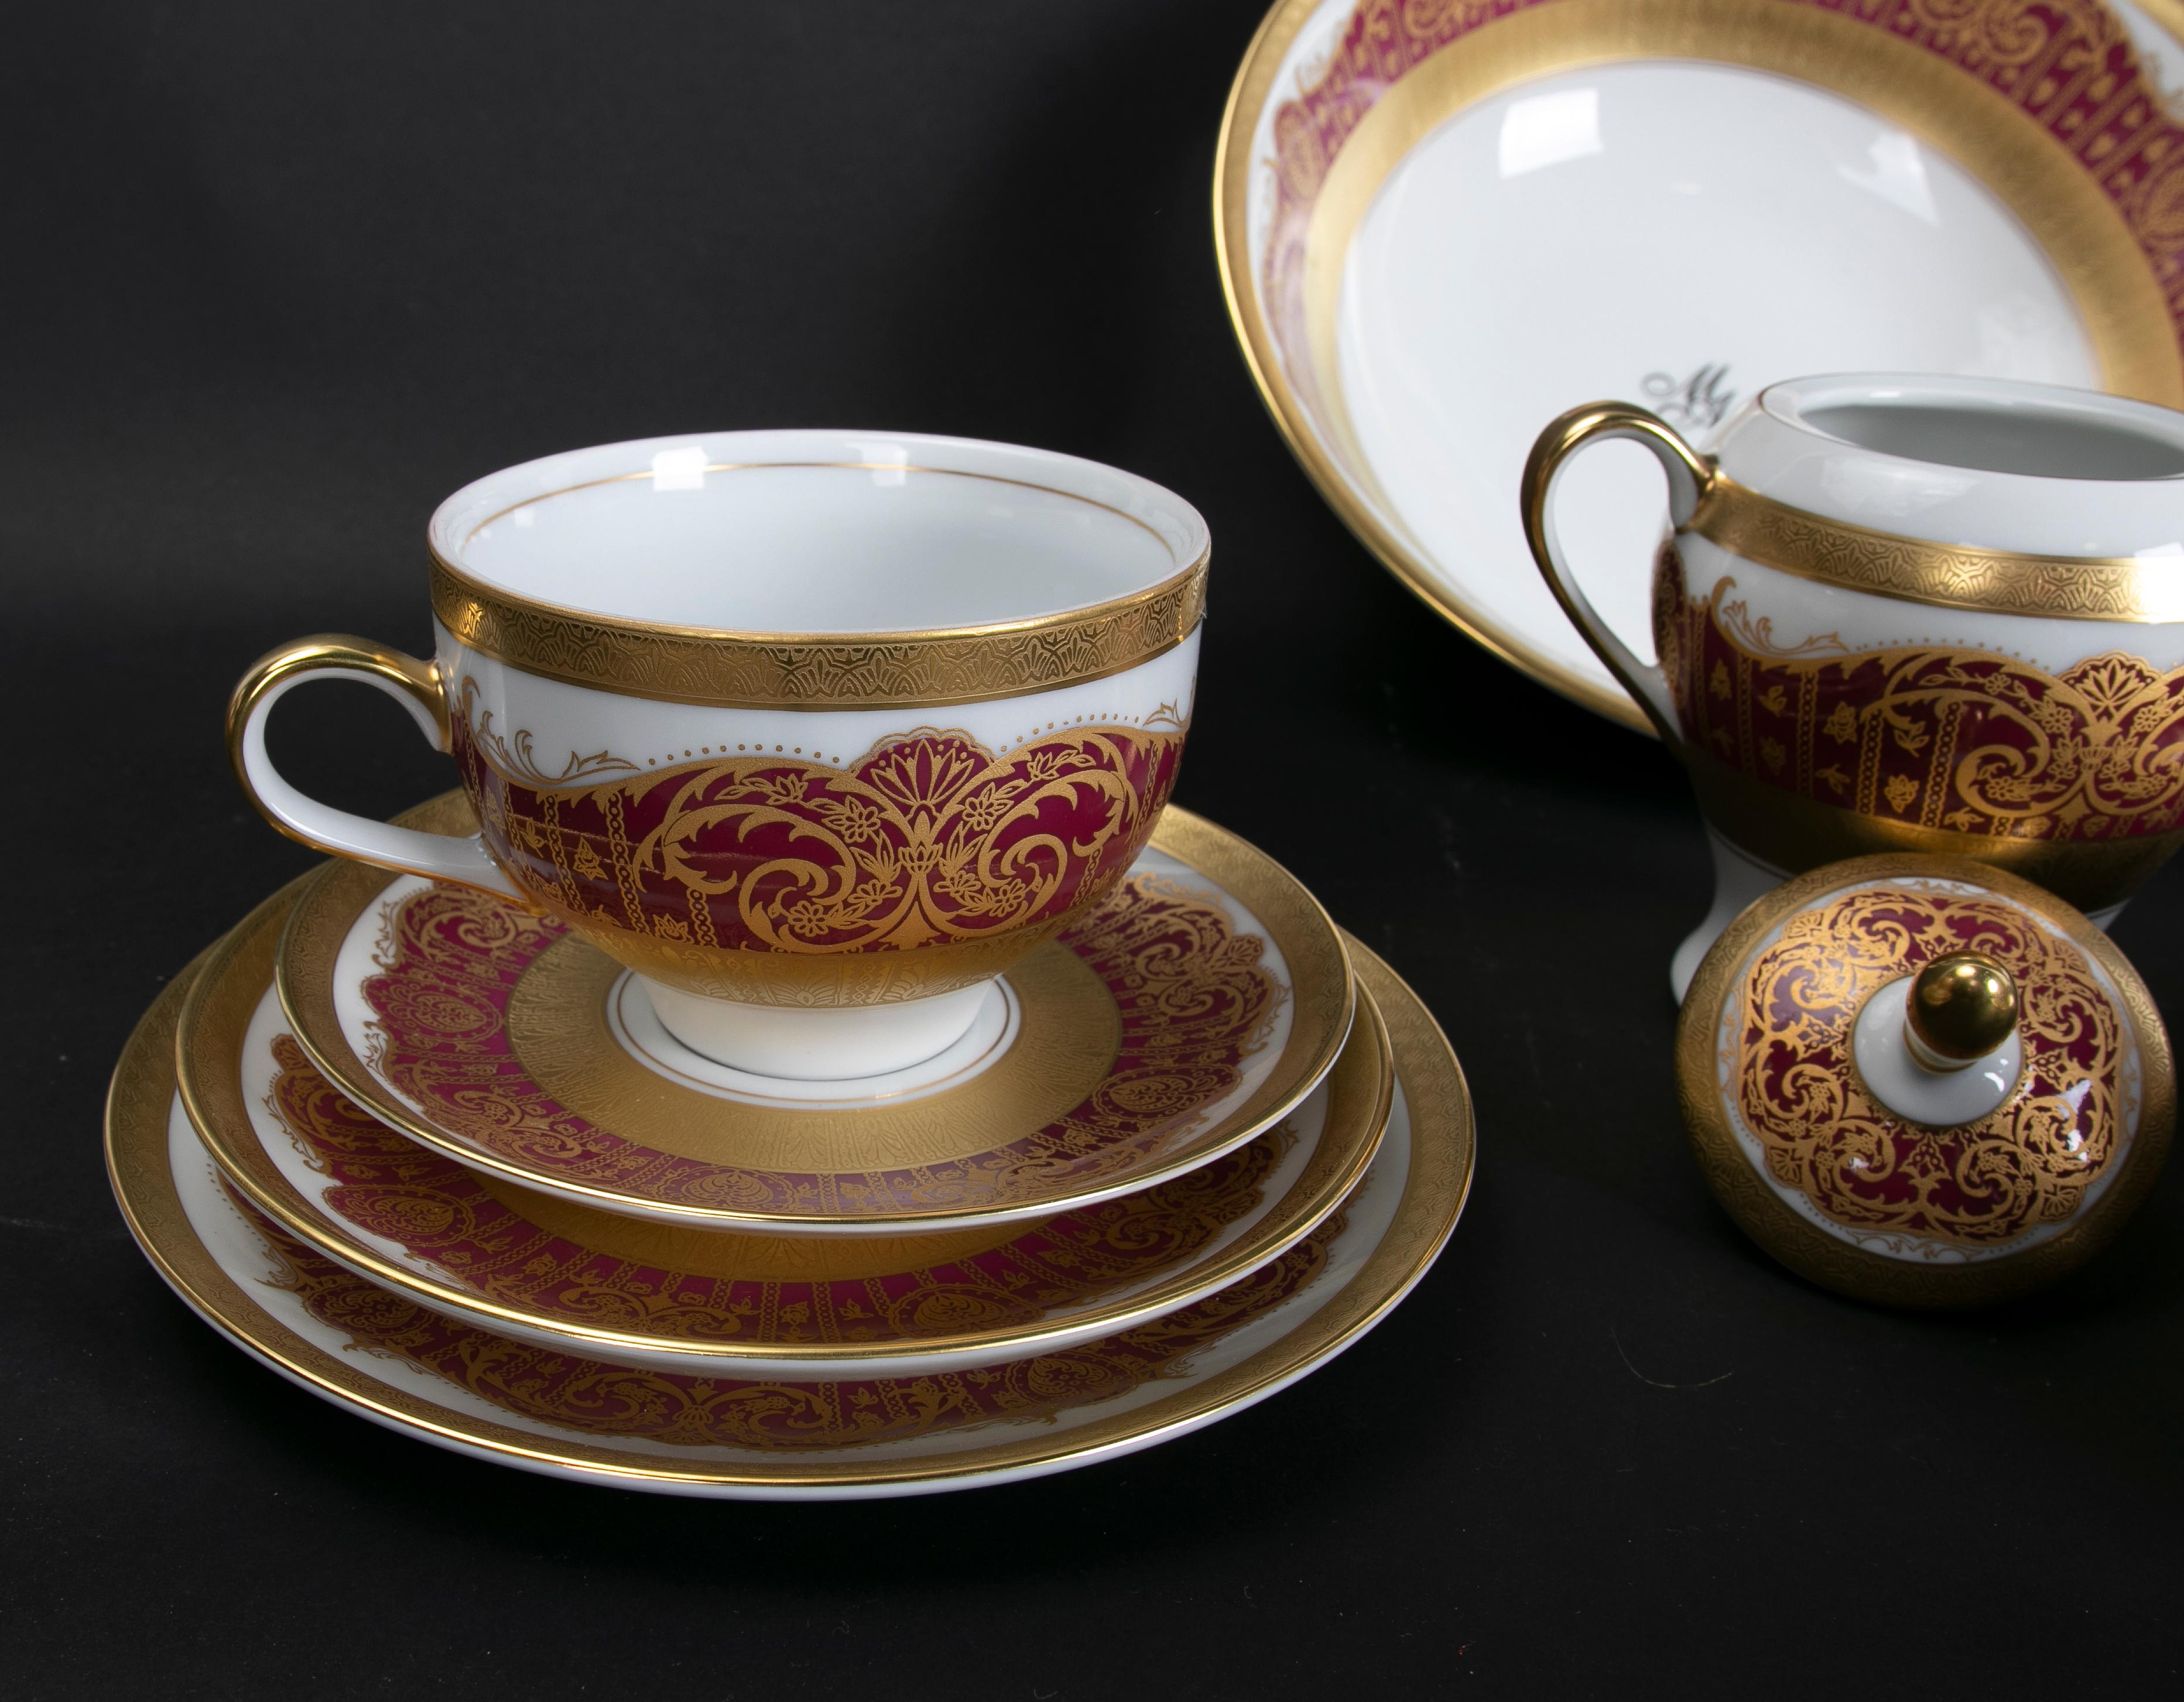 Complete Karlovarsky Porcelain Tableware '229 Pieces' Decorated with Gold For Sale 11